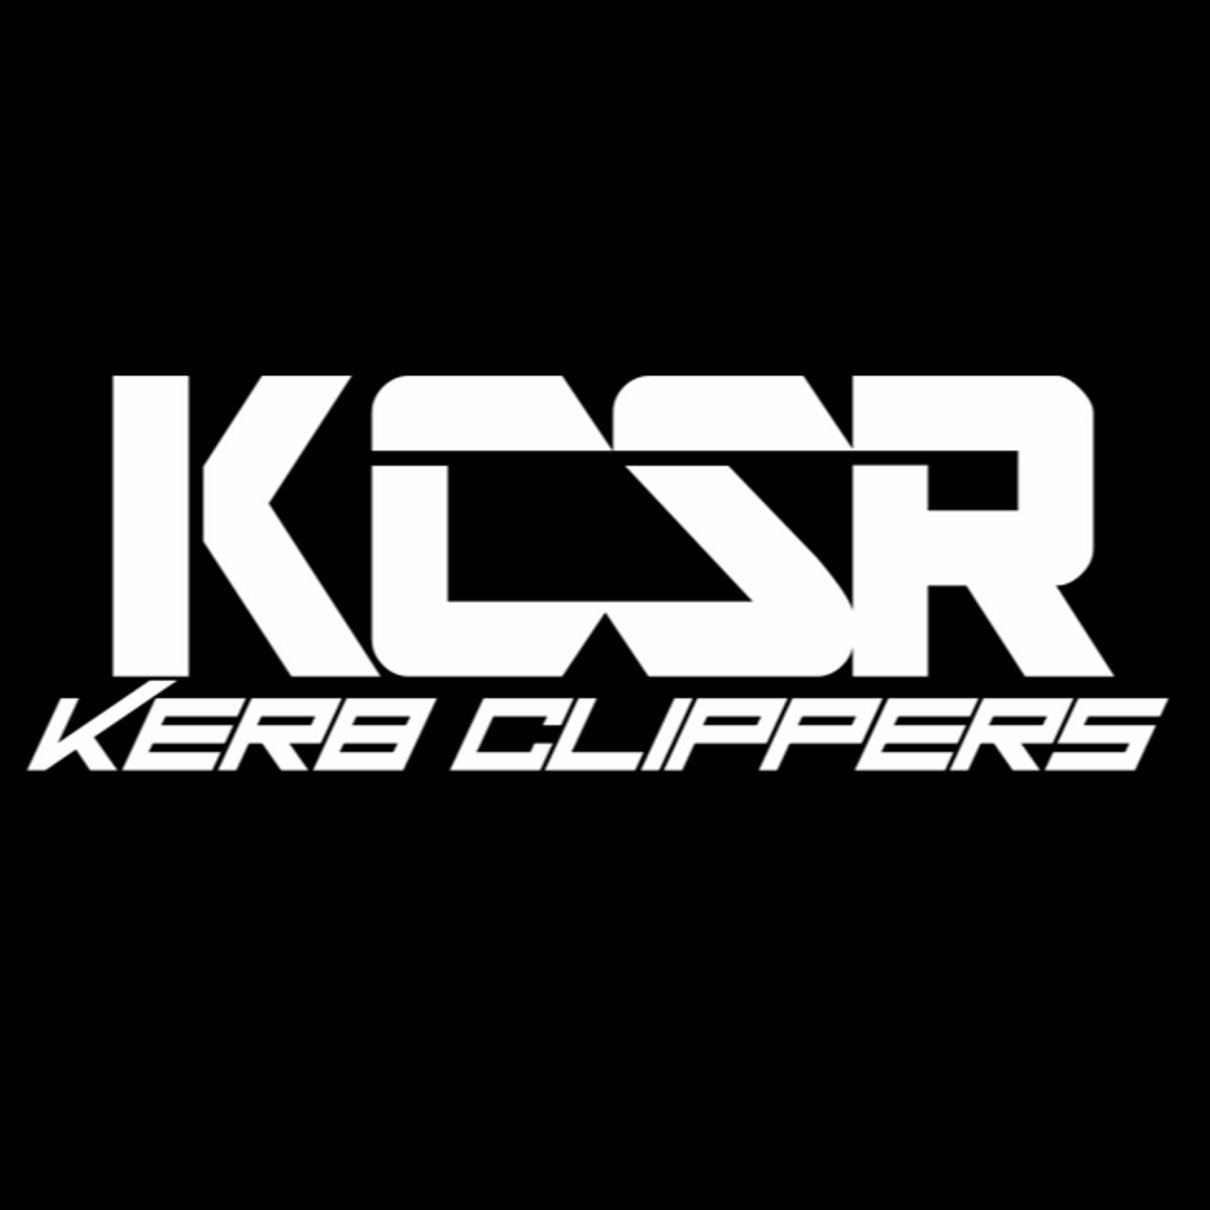 Kerb Clippers